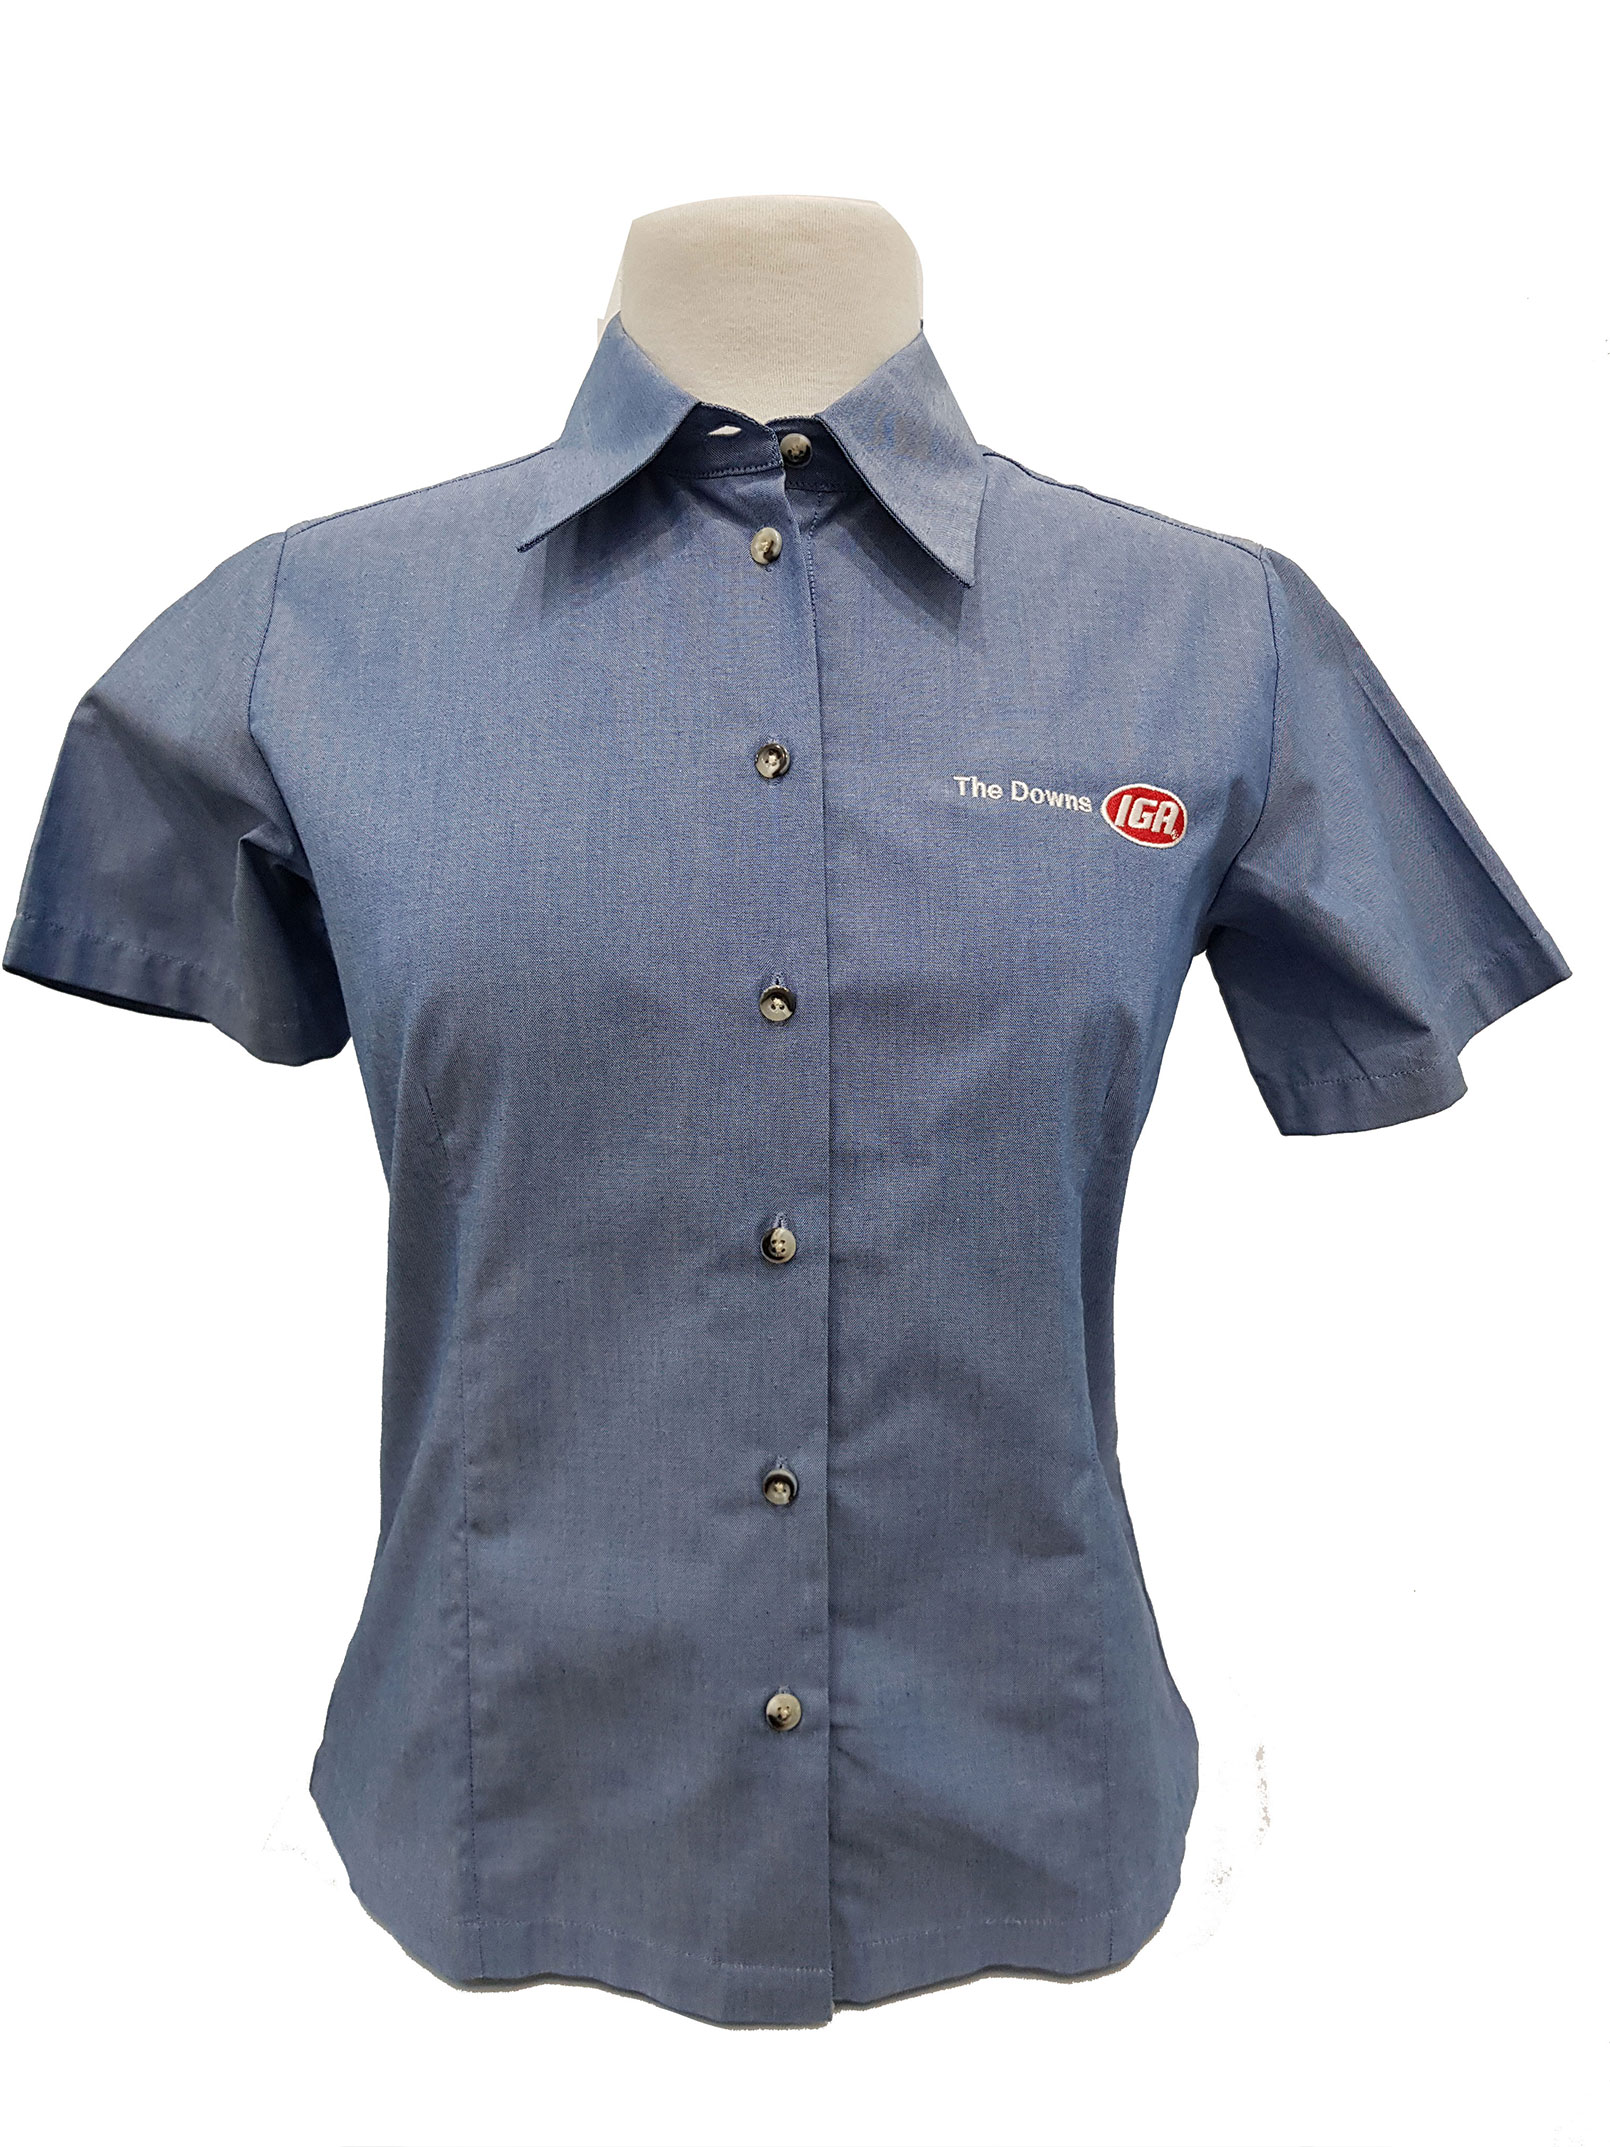 Embroidery - Wanneroo Uniforms Perth